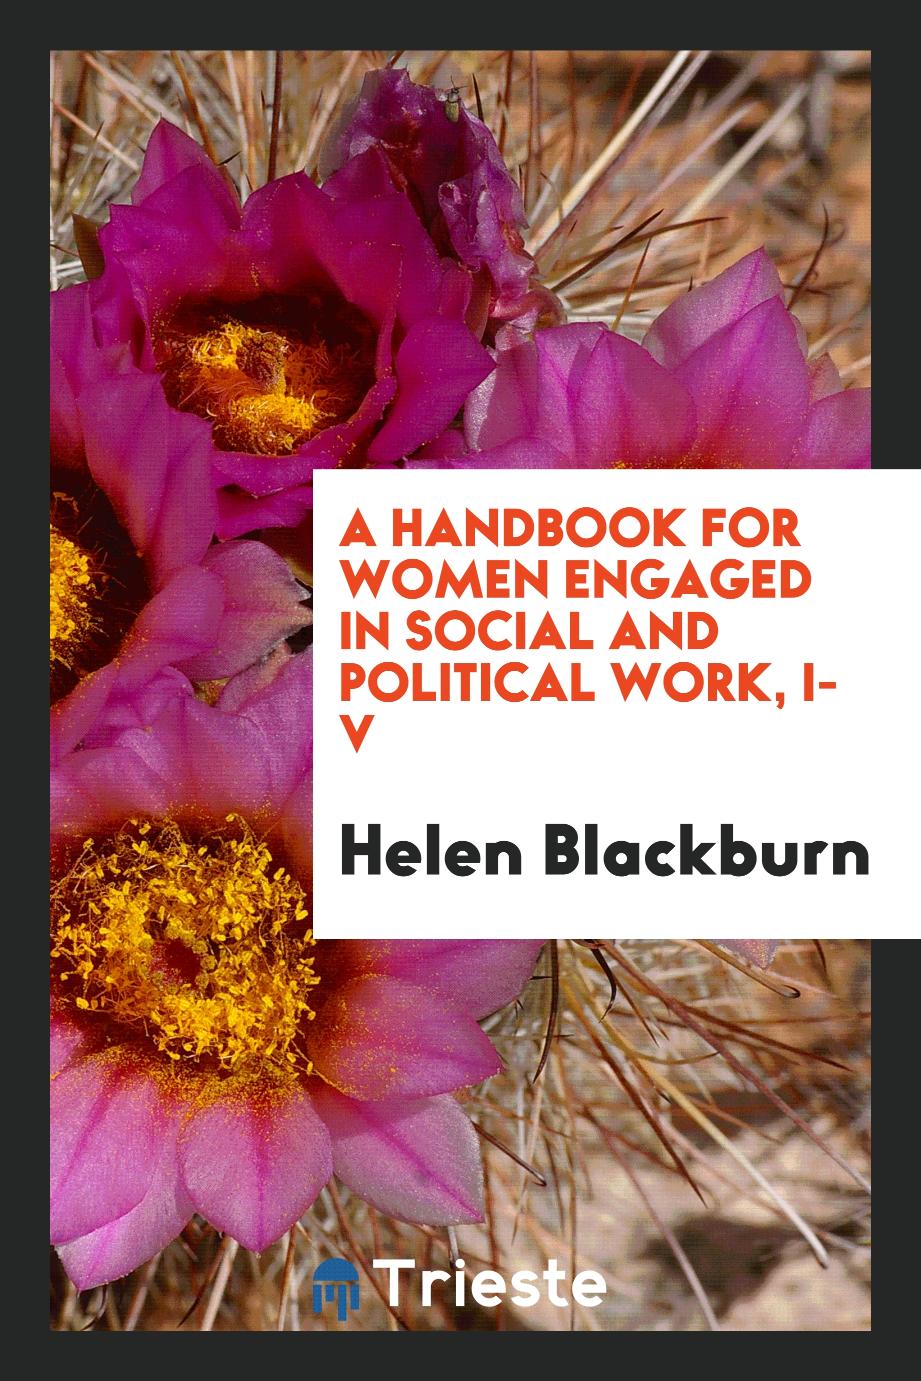 A handbook for women engaged in social and political work, I-V